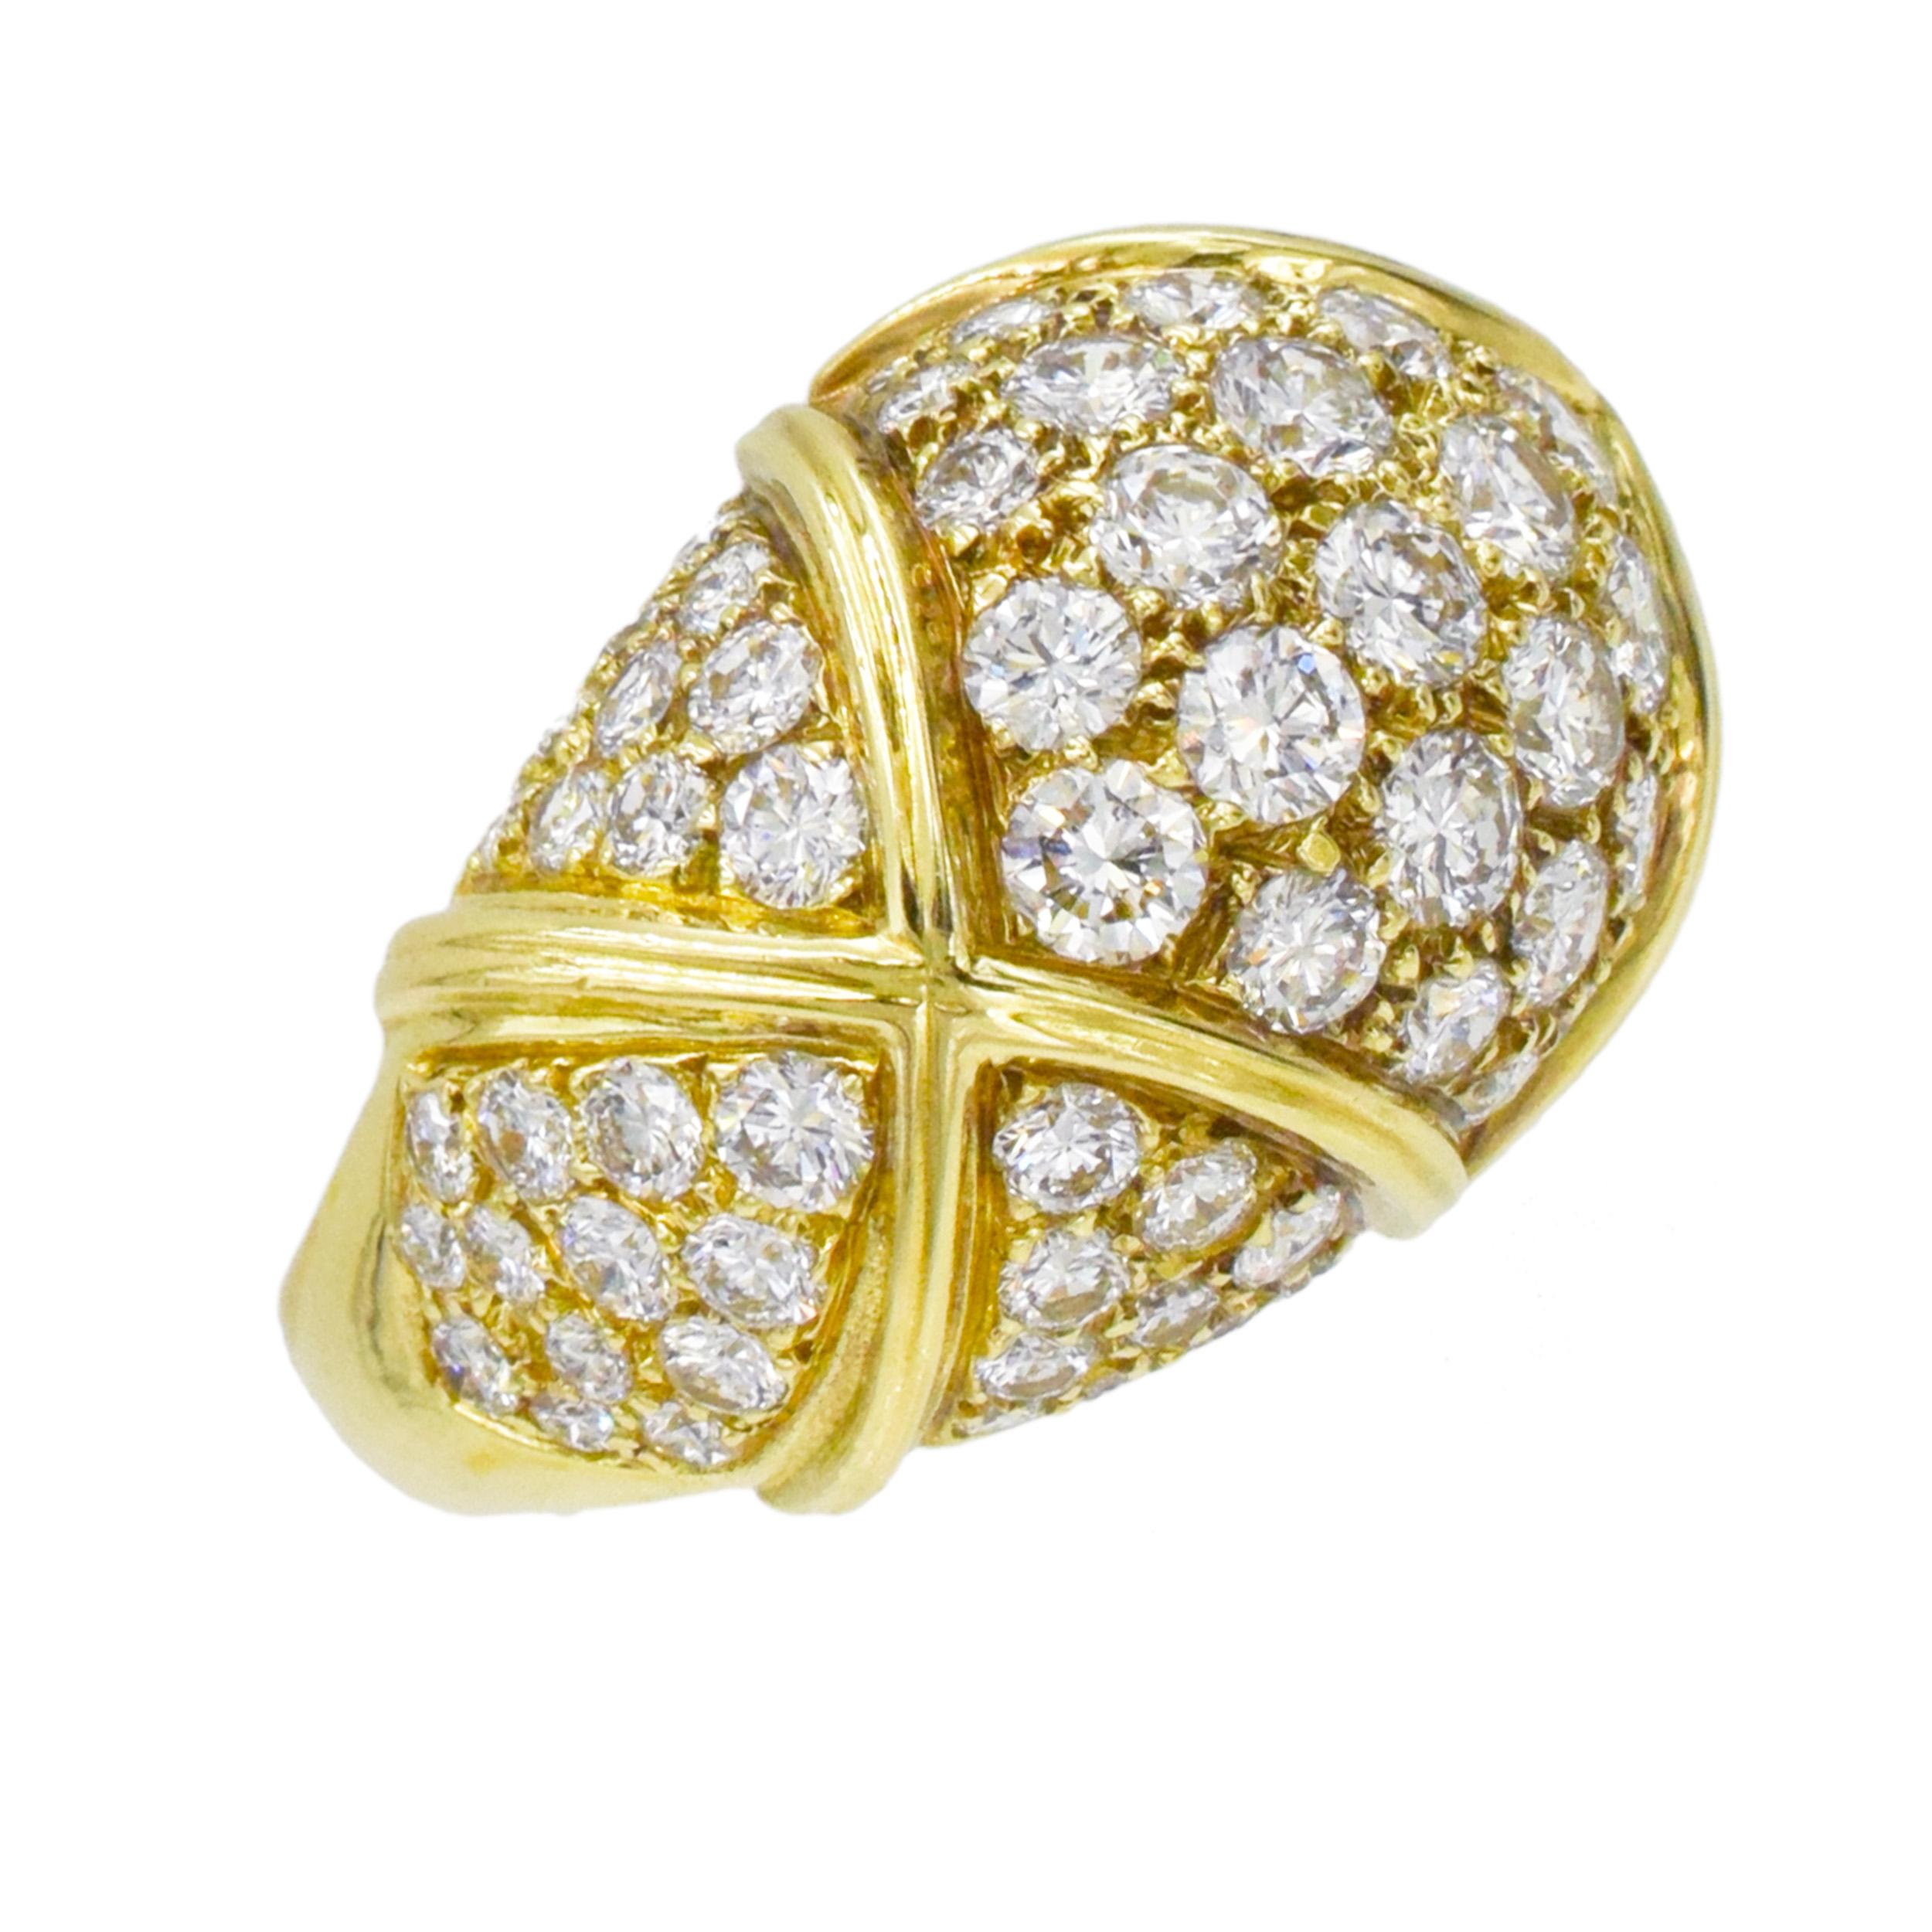 Van Cleef & Arpels Gold and Diamond Dome Ring For Sale 4